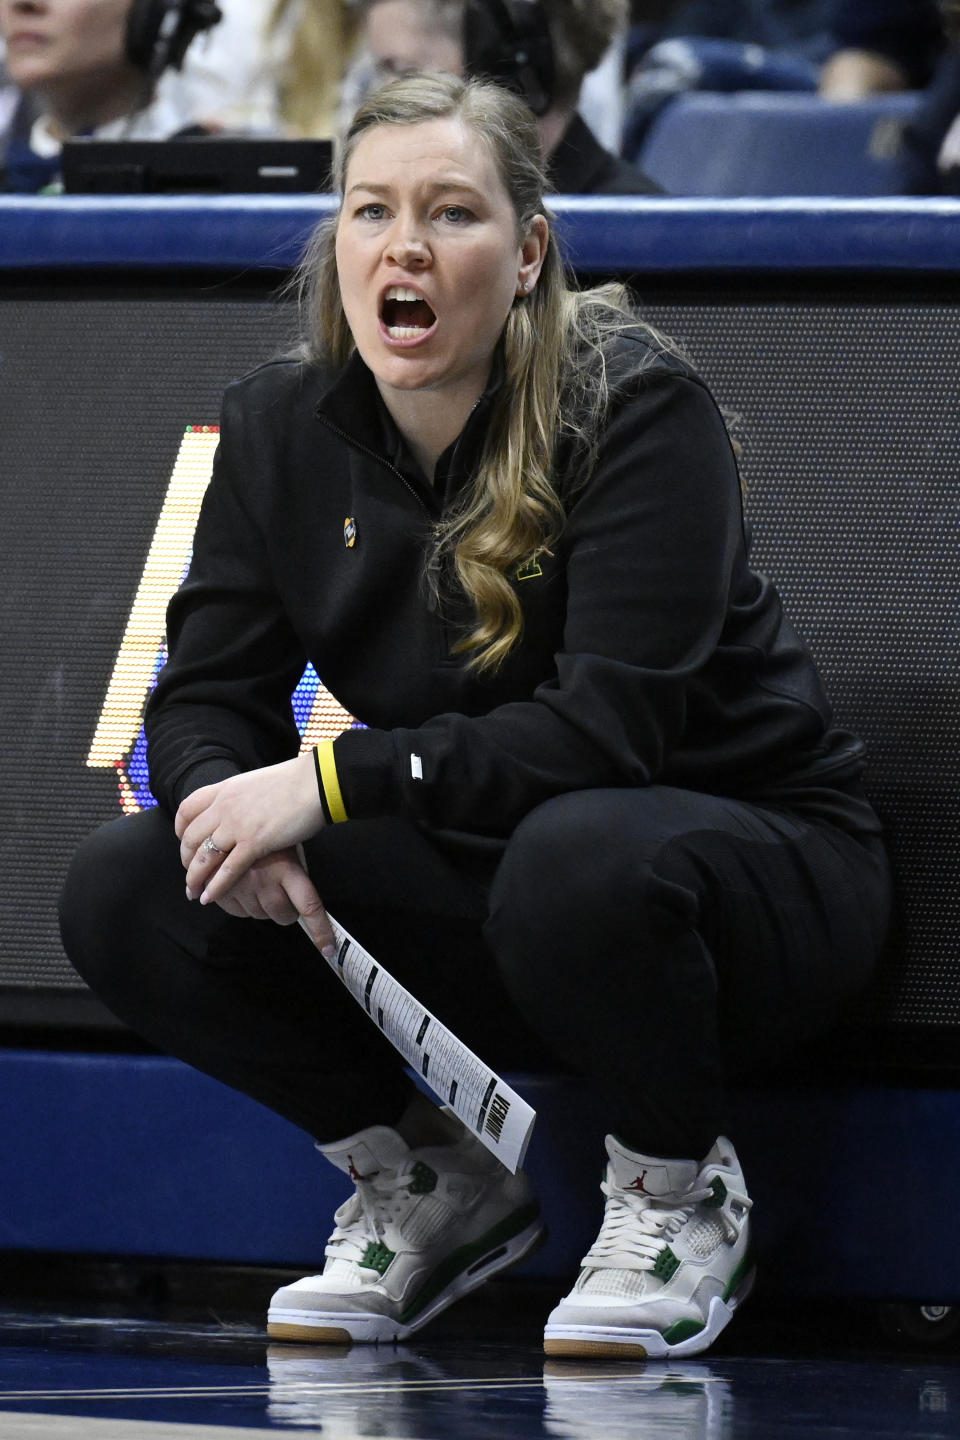 Vermont head coach Alisa Kresge calls out to her team in the first half of a first-round college basketball game against UConn in the NCAA Tournament, Saturday, March 18, 2023, in Storrs, Conn. (AP Photo/Jessica Hill)